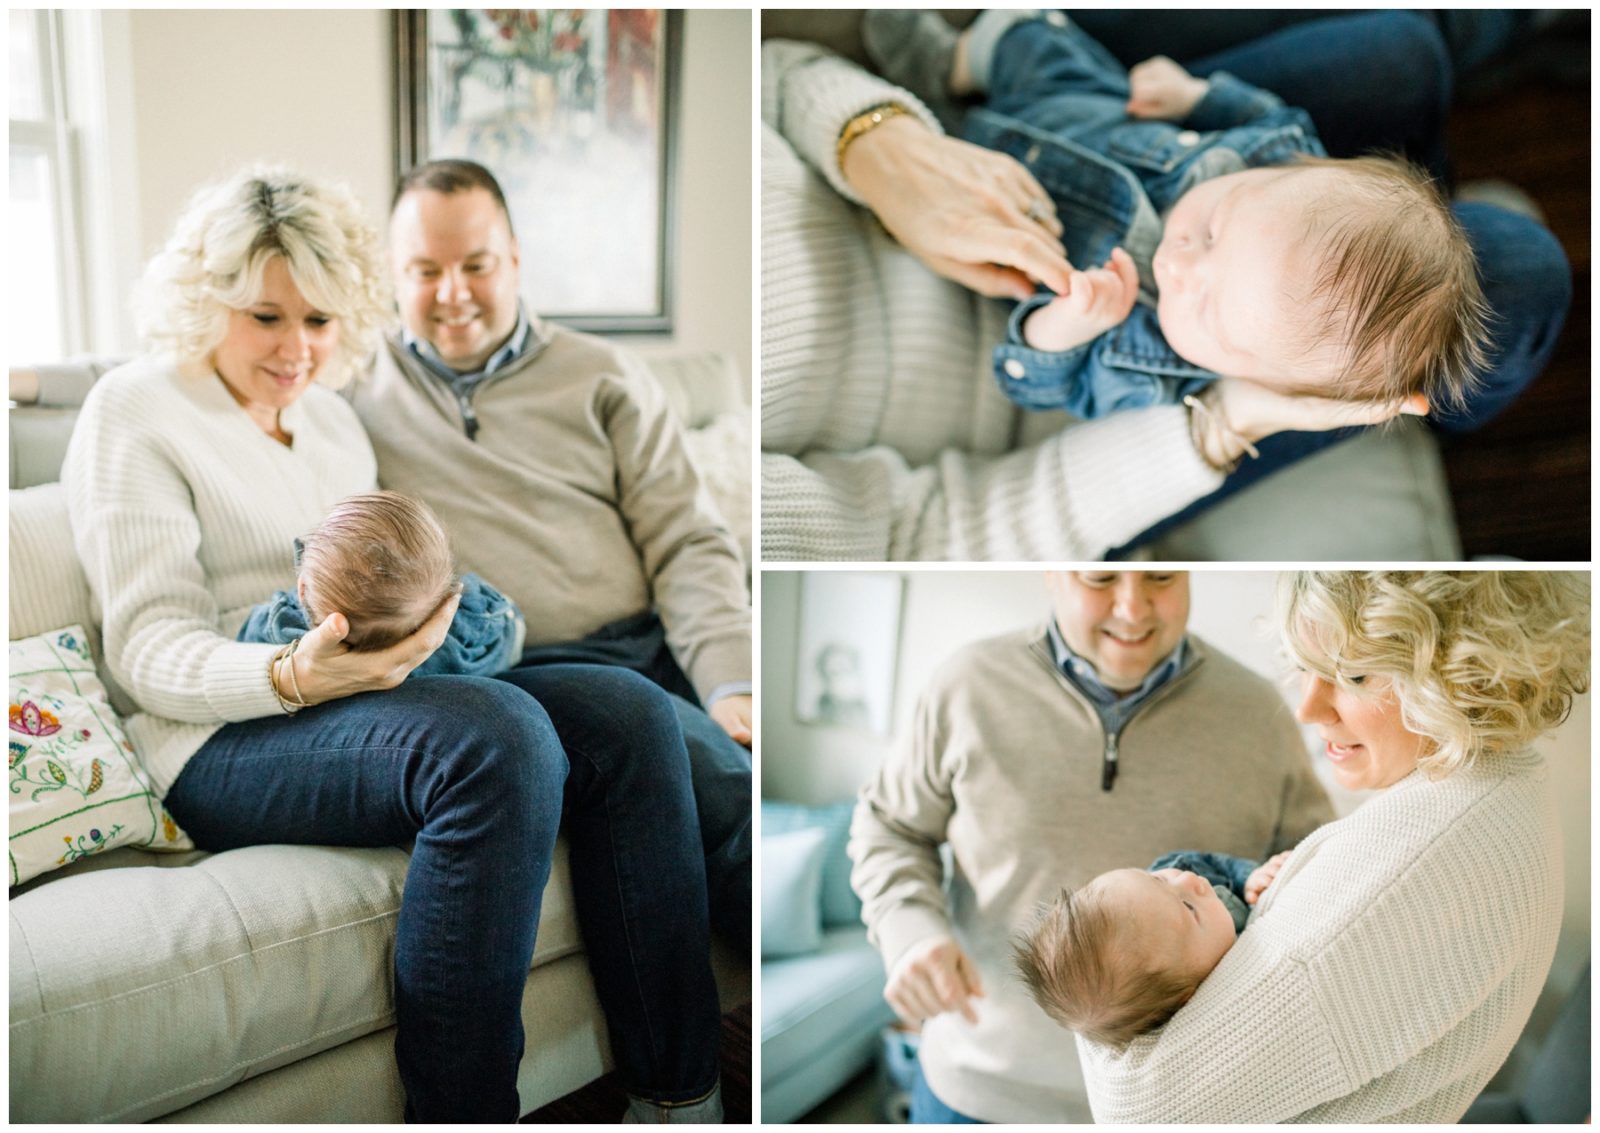 Pictures of a newborn baby with his parents.